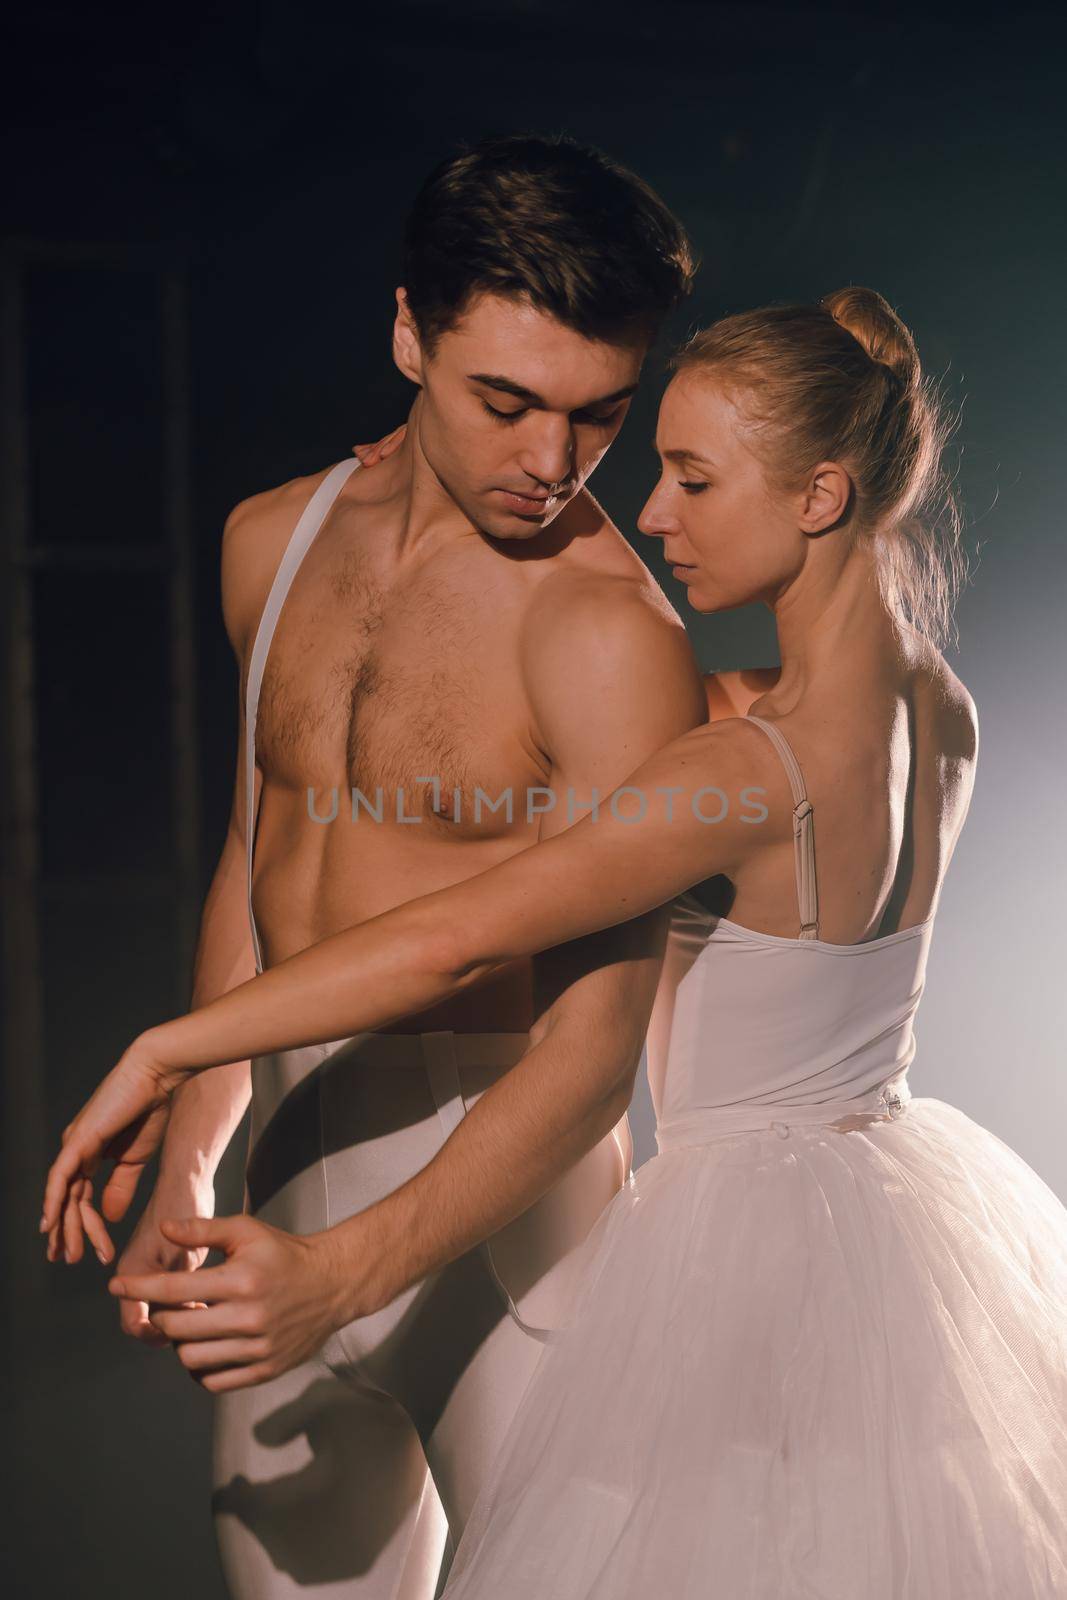 Pair touching each other with hands and passion. Love concept. Professional, sensual ballet dancers performed by sexual couple in white wear